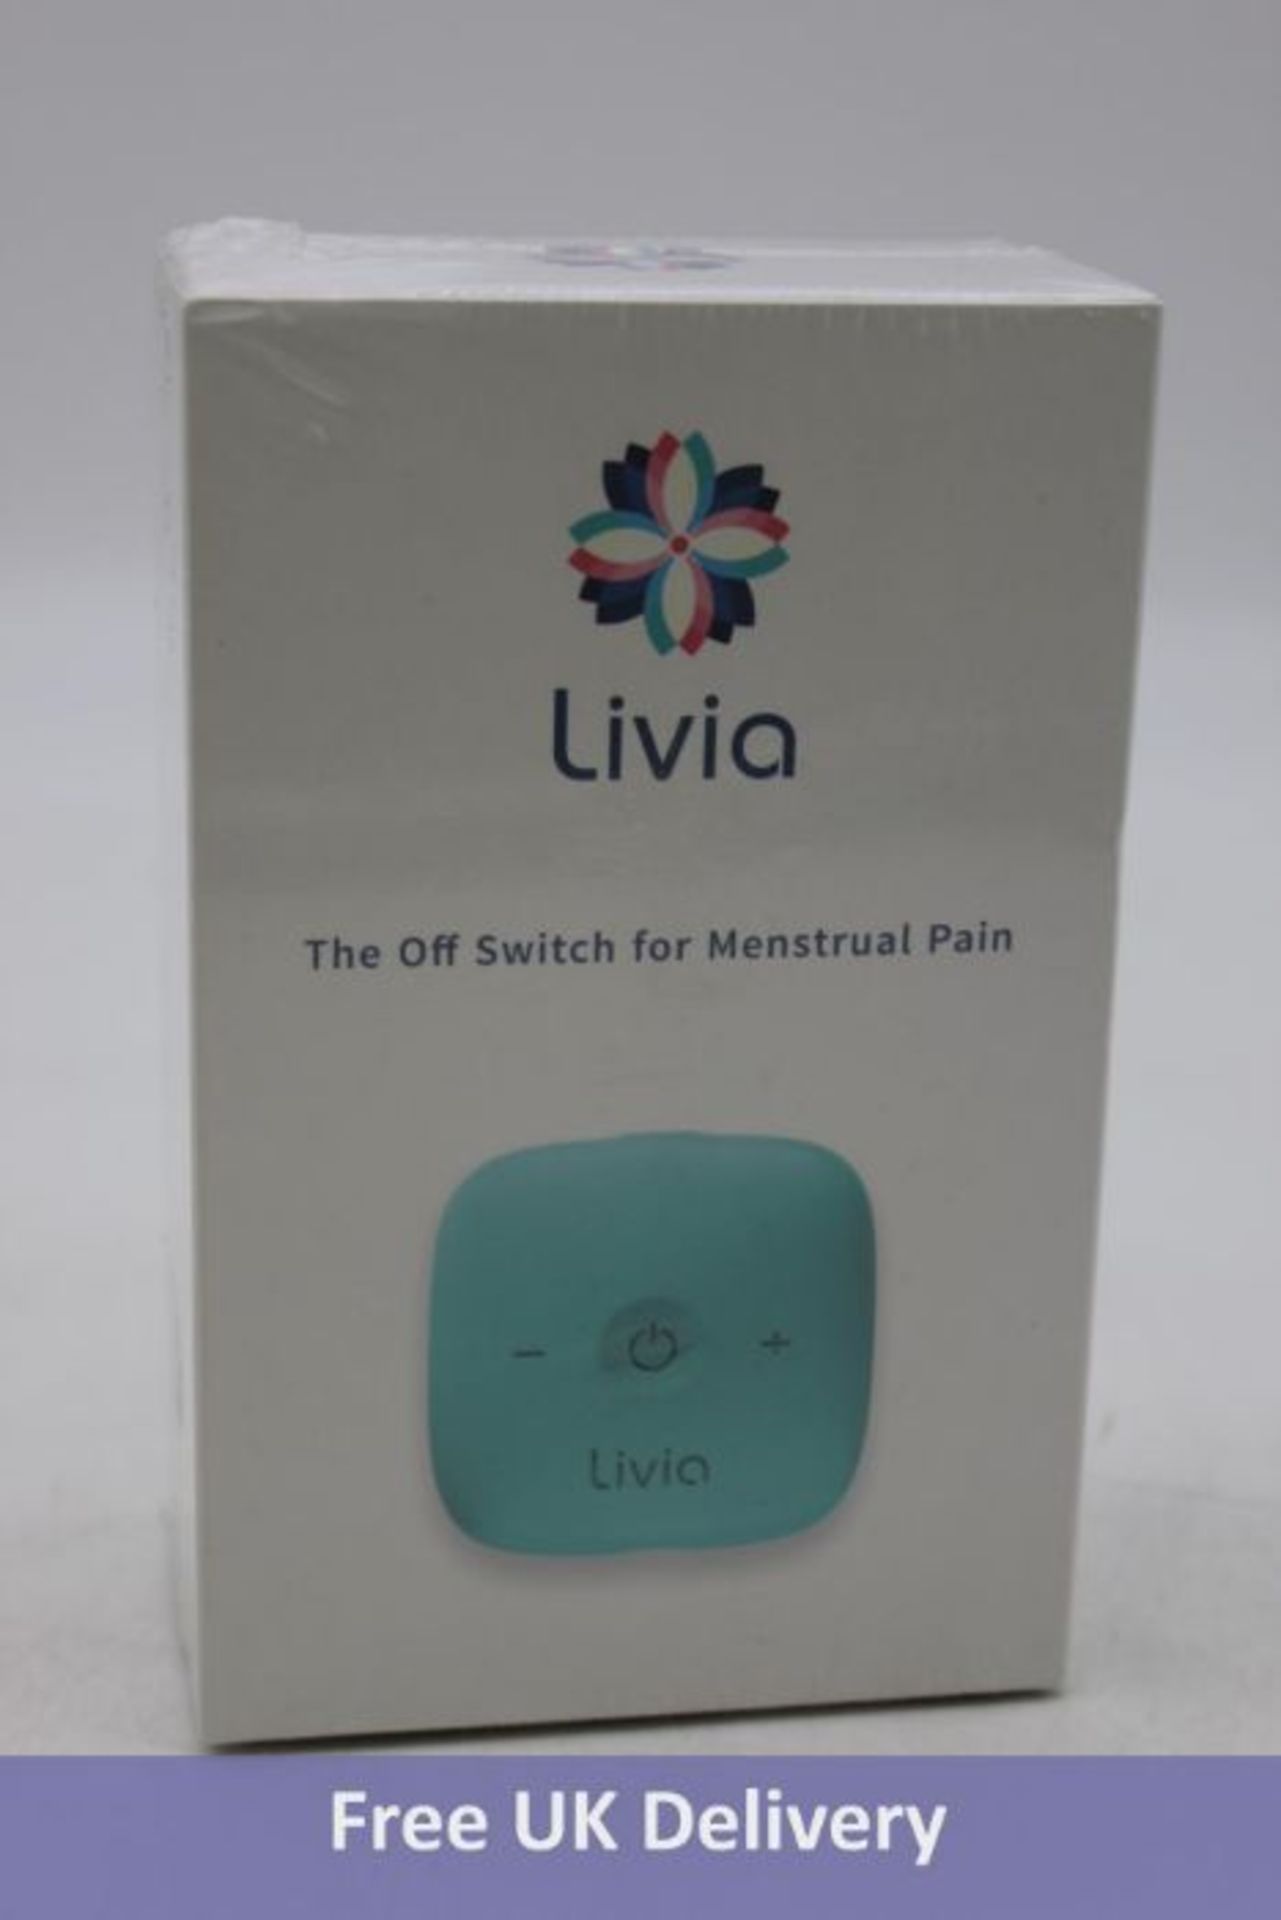 Livia Period Pain Reliever, Drug Free Relief from Menstrual Cramps, Wearable Device, Nerve Stimulato